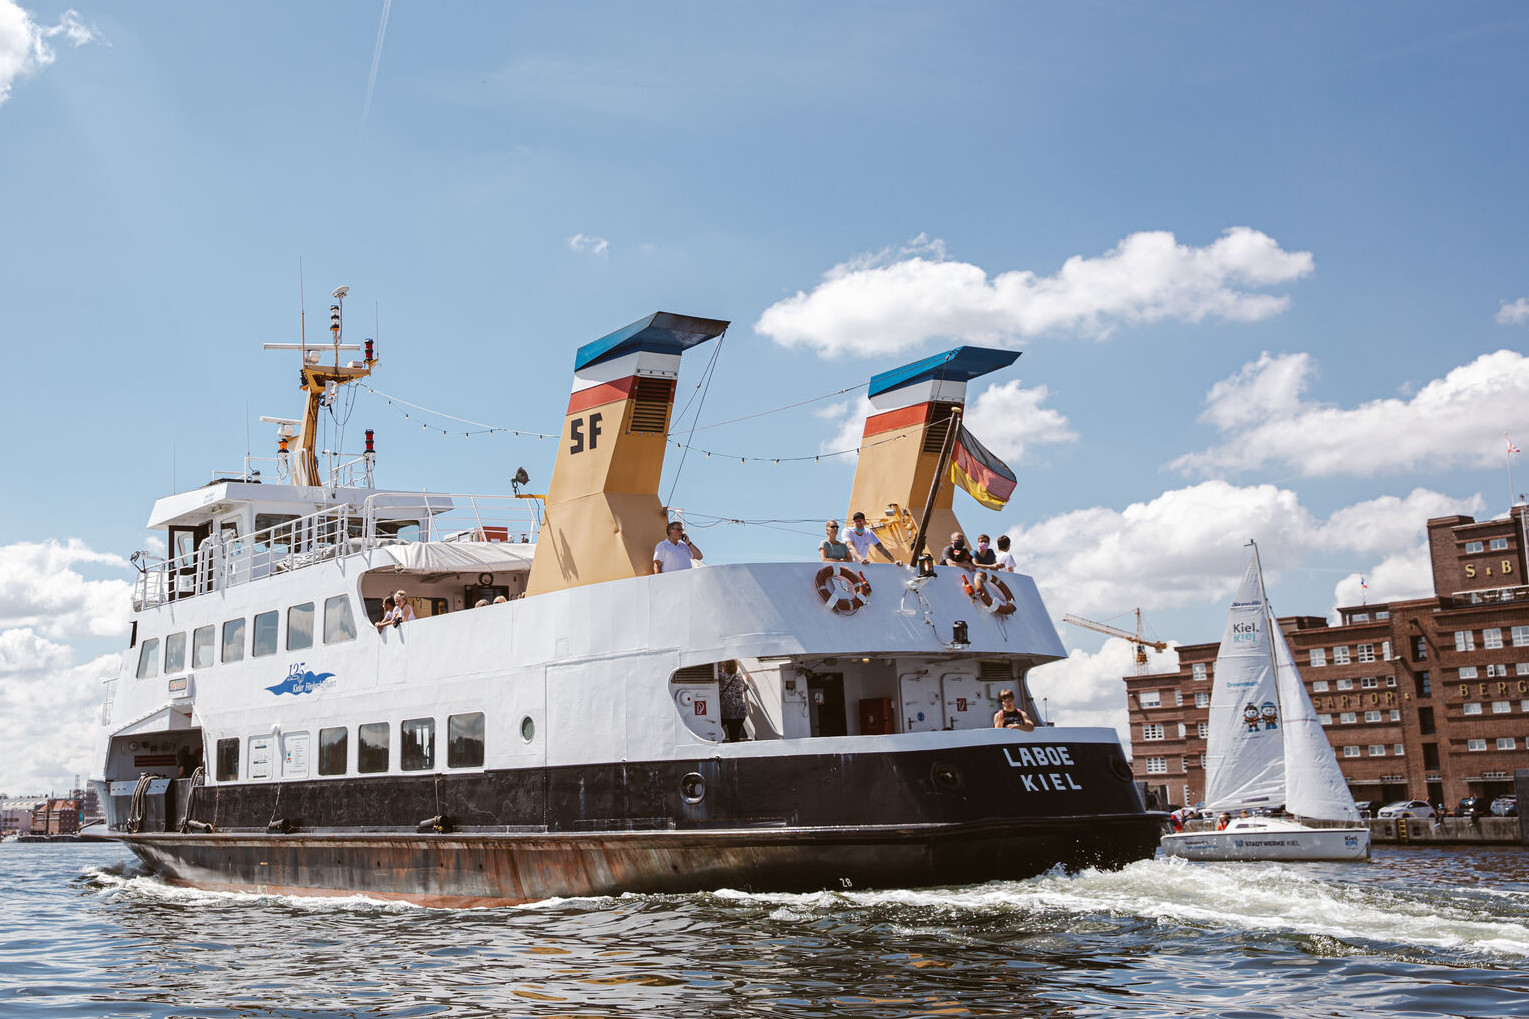  Experience the Kiel Fjord on the water during a harbor cruise!